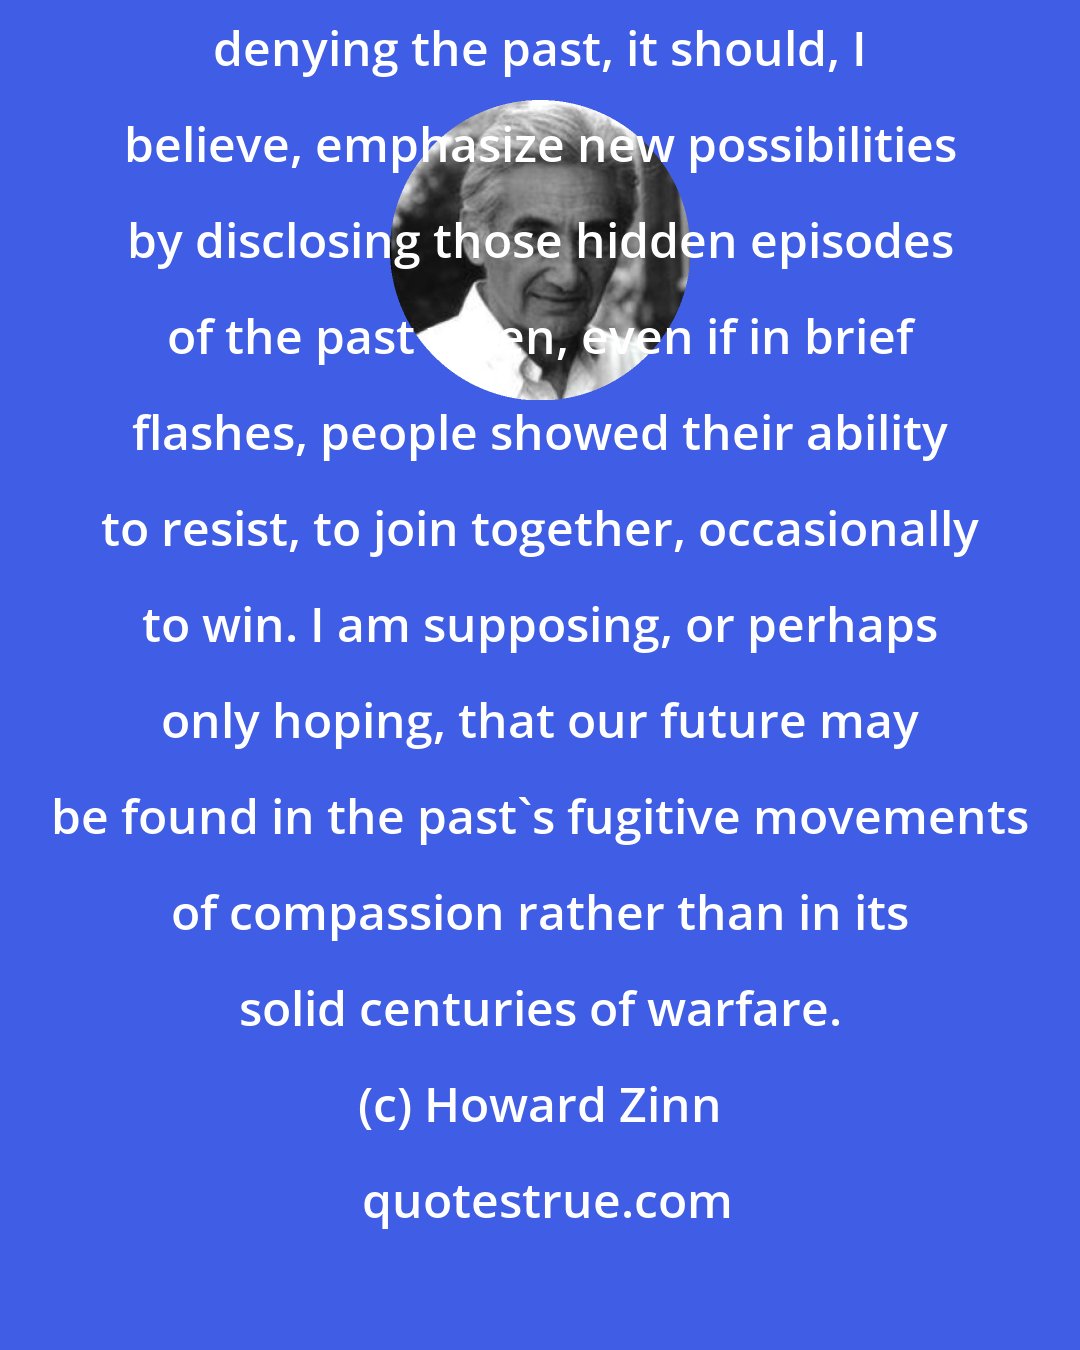 Howard Zinn: If history is to be creative, to anticipate a possible future without denying the past, it should, I believe, emphasize new possibilities by disclosing those hidden episodes of the past when, even if in brief flashes, people showed their ability to resist, to join together, occasionally to win. I am supposing, or perhaps only hoping, that our future may be found in the past's fugitive movements of compassion rather than in its solid centuries of warfare.